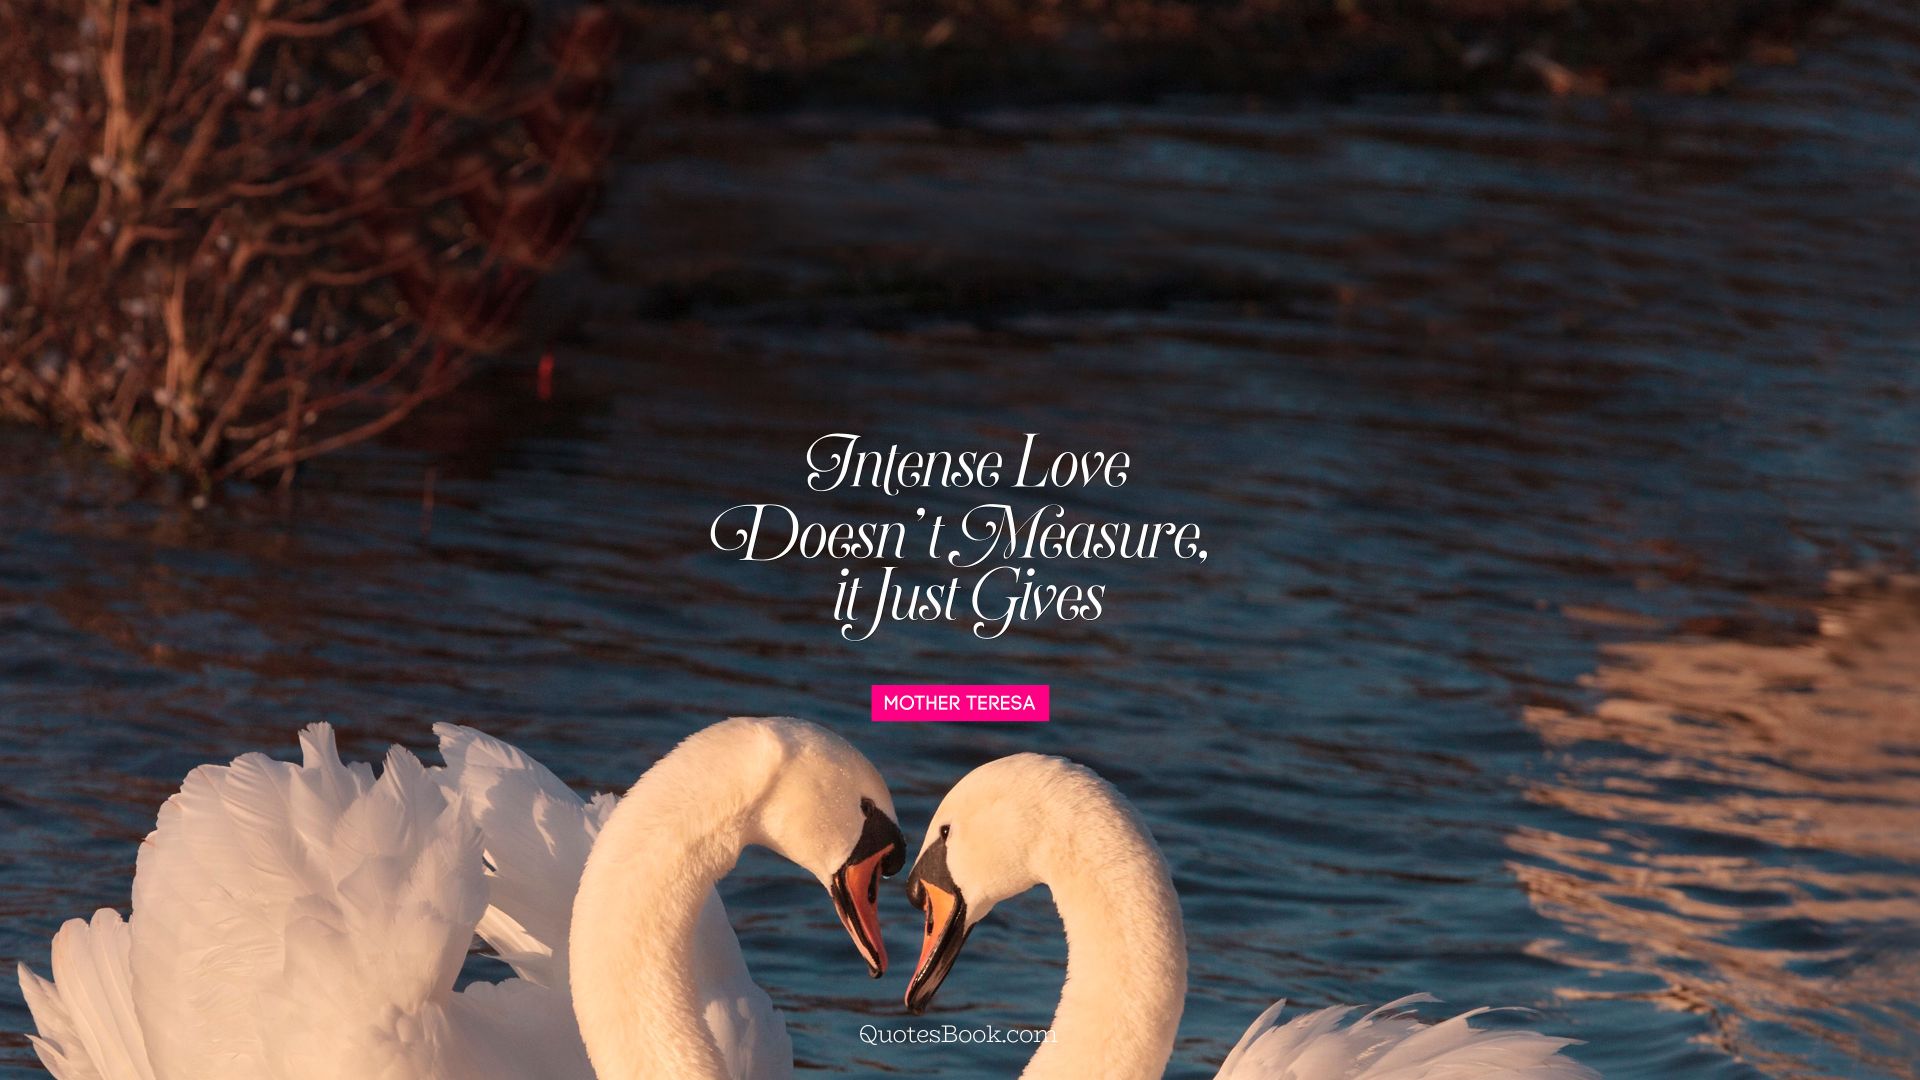 Intense love doesn’t measure, 
it just gives
. - Quote by Mother Teresa